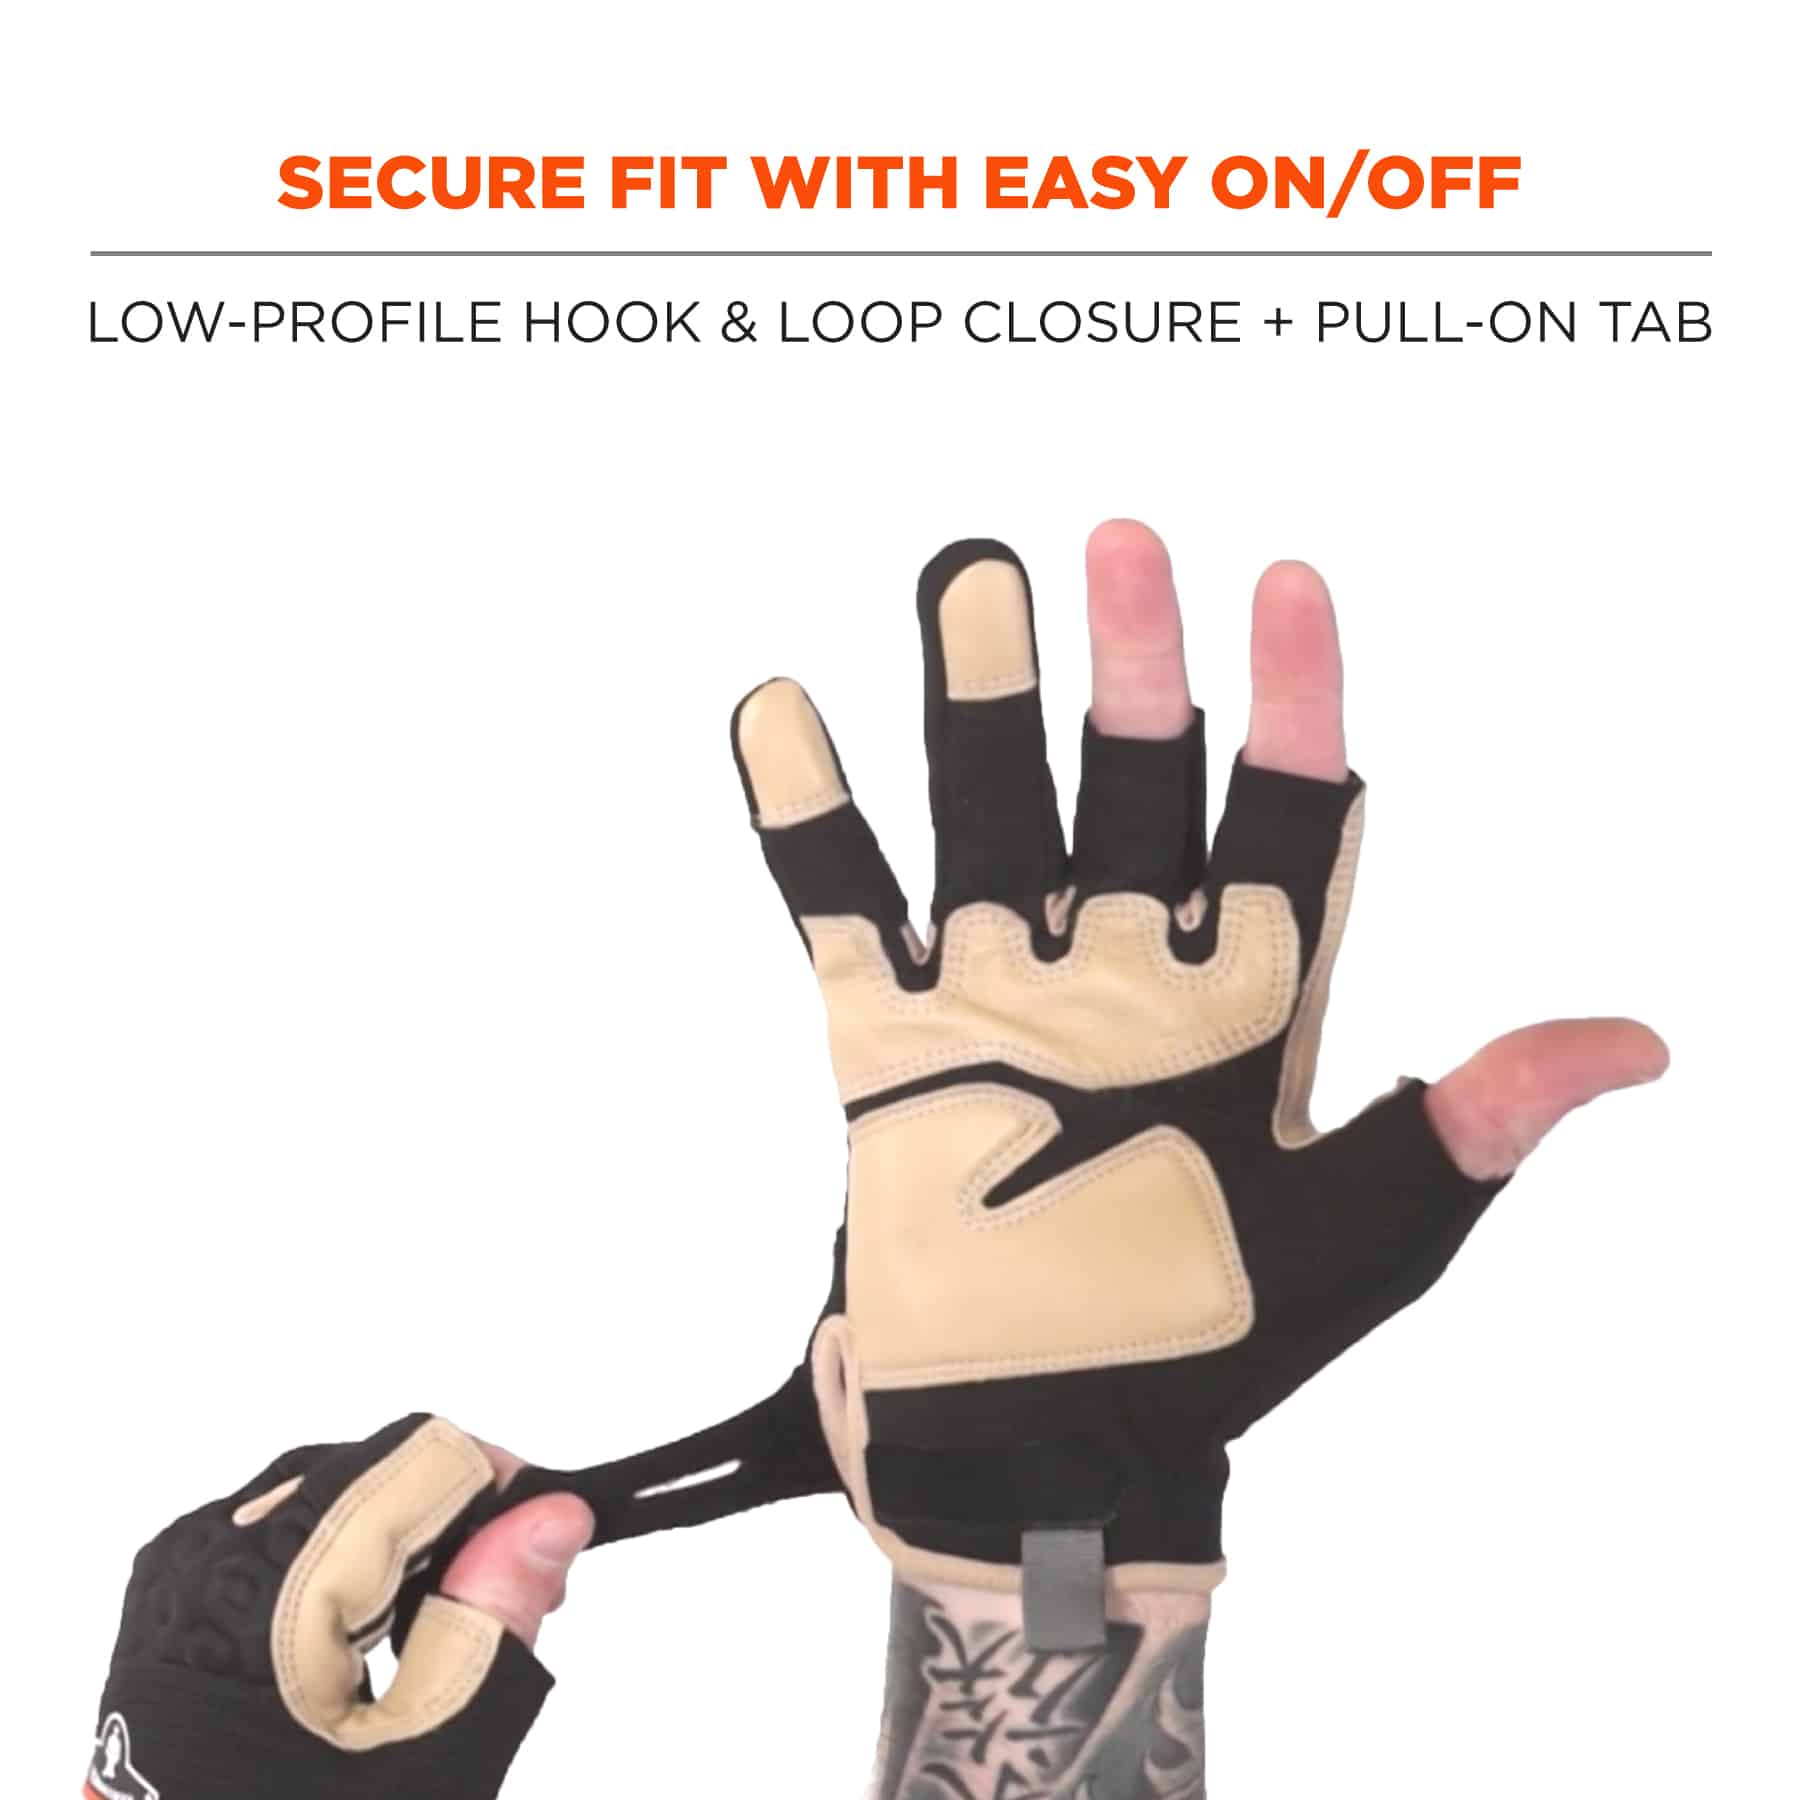 https://www.ergodyne.com/sites/default/files/product-images/17152-720ltr-heavy-duty-framing-gloves-secure-fit-with-easy-on-off.jpg